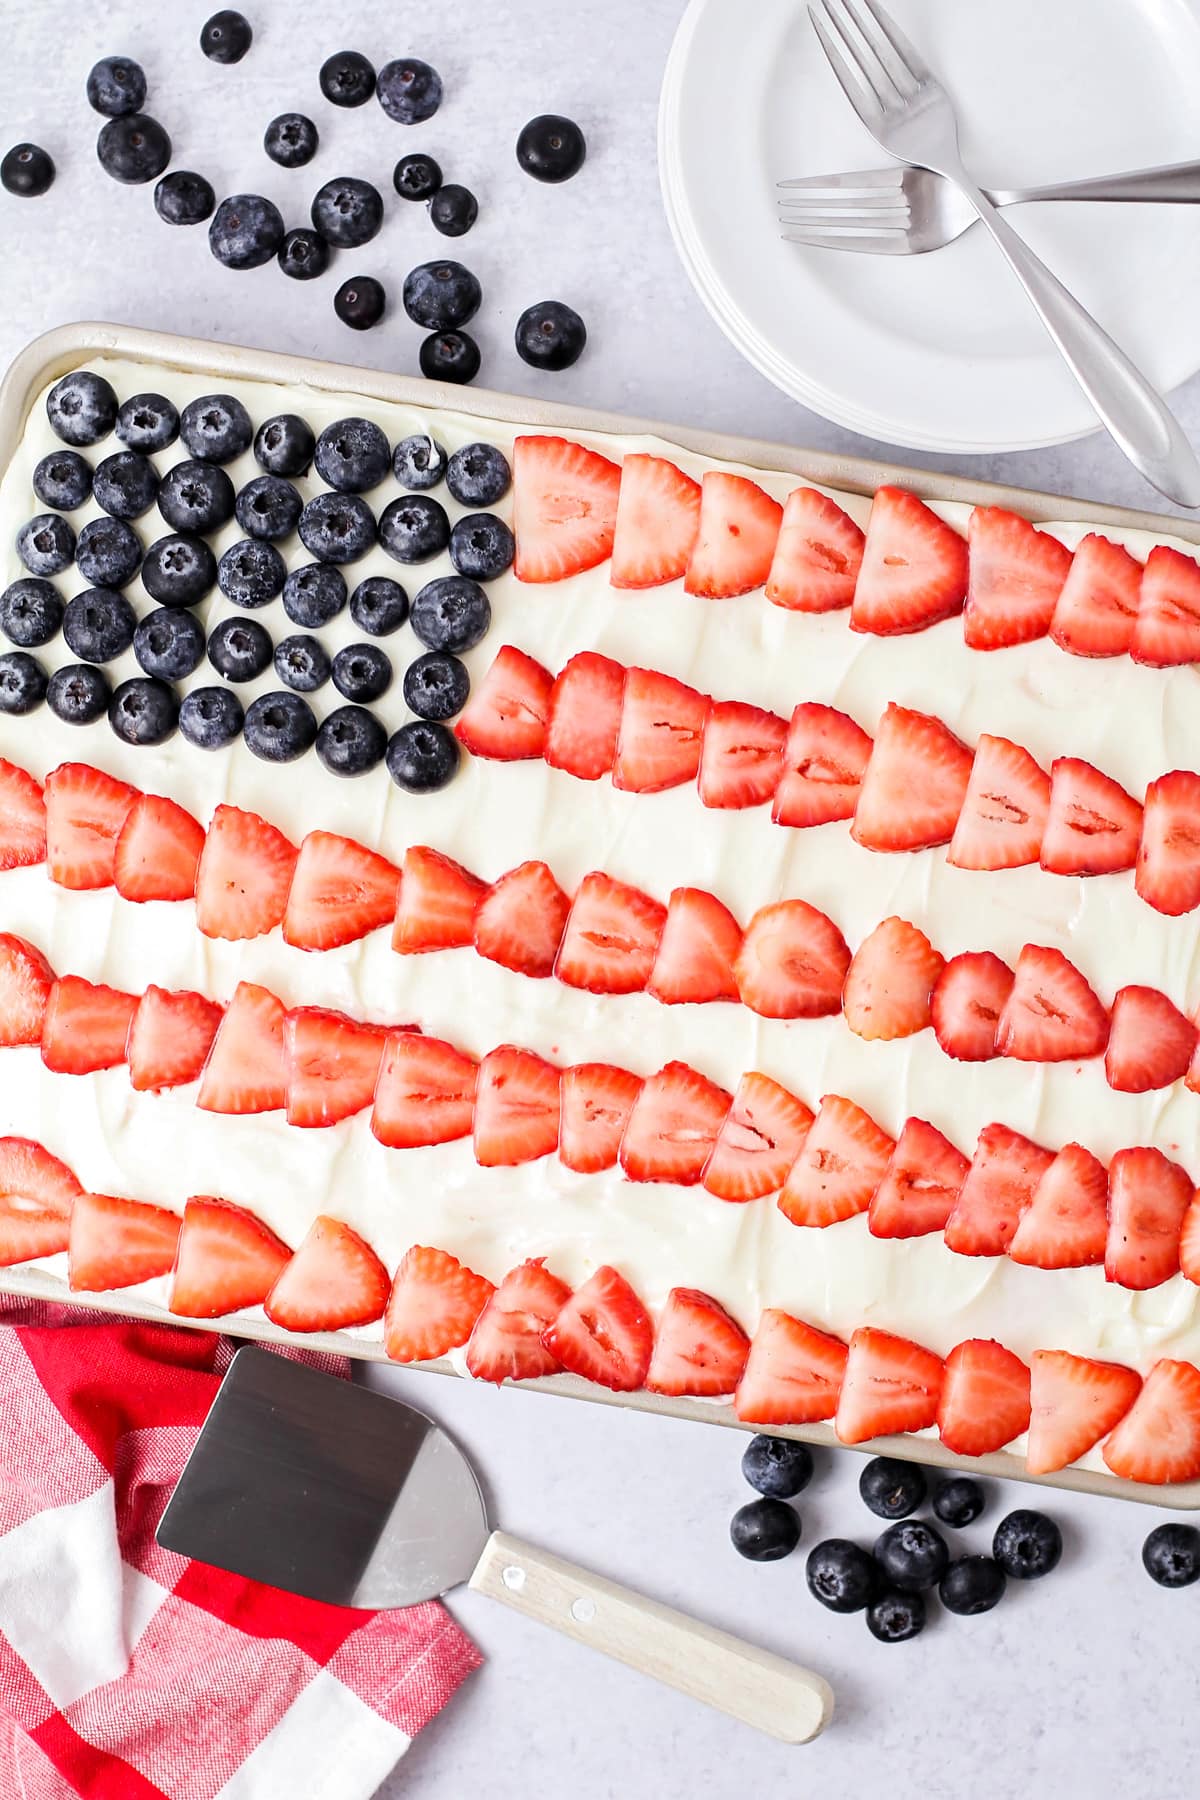 American Flag Cake decorated with blueberries and strawberries.